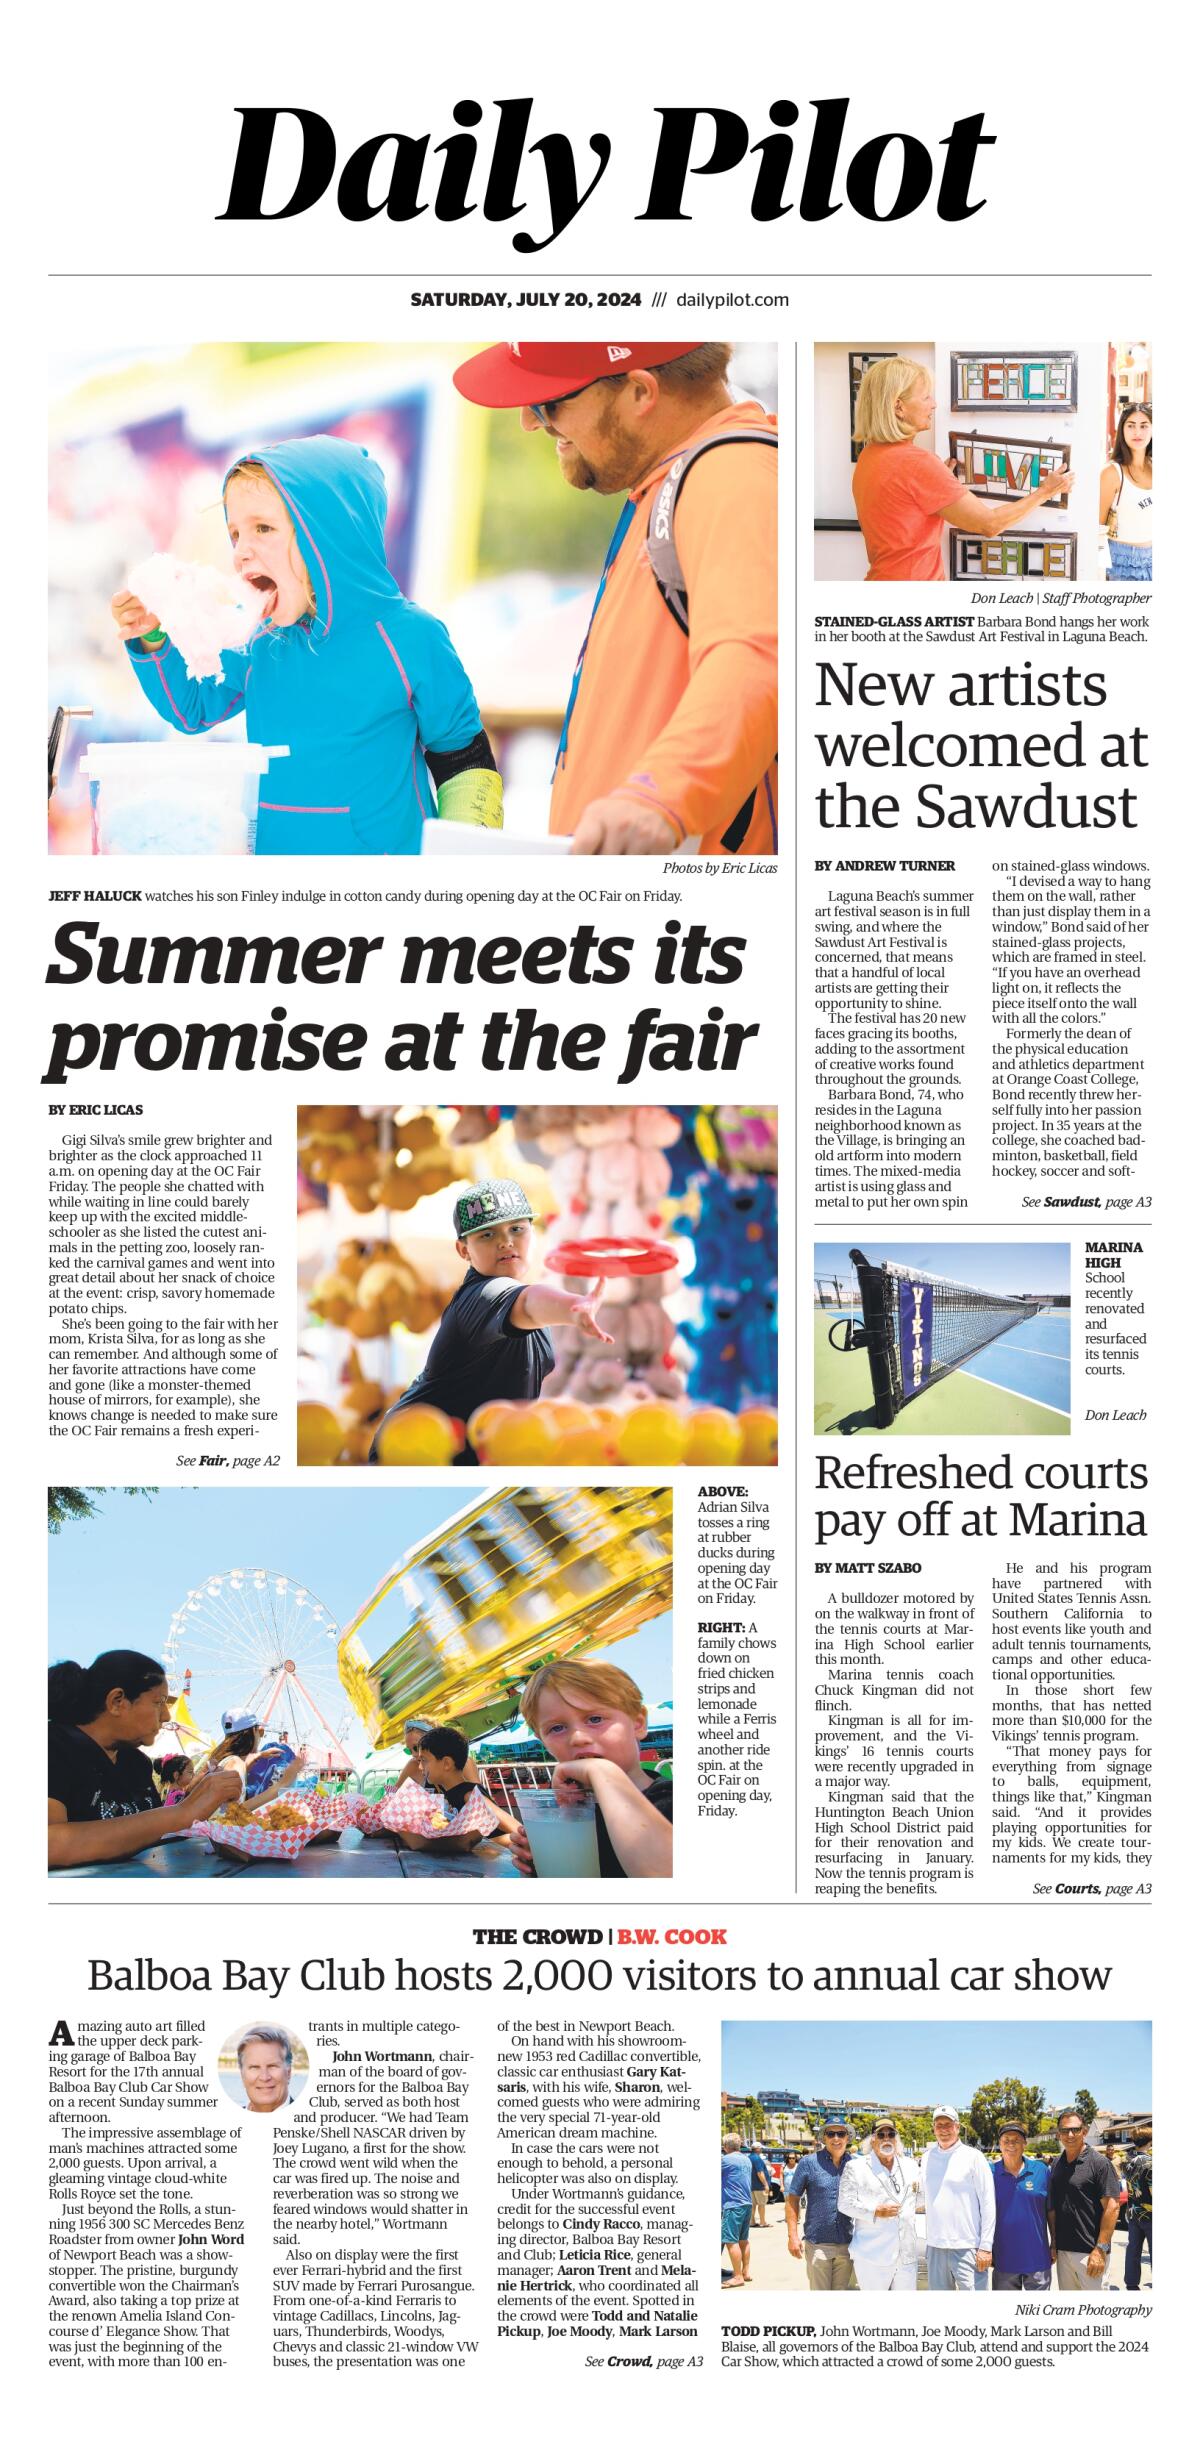 Front page of the Daily Pilot e-newspaper for Saturday, July 20, 2024.